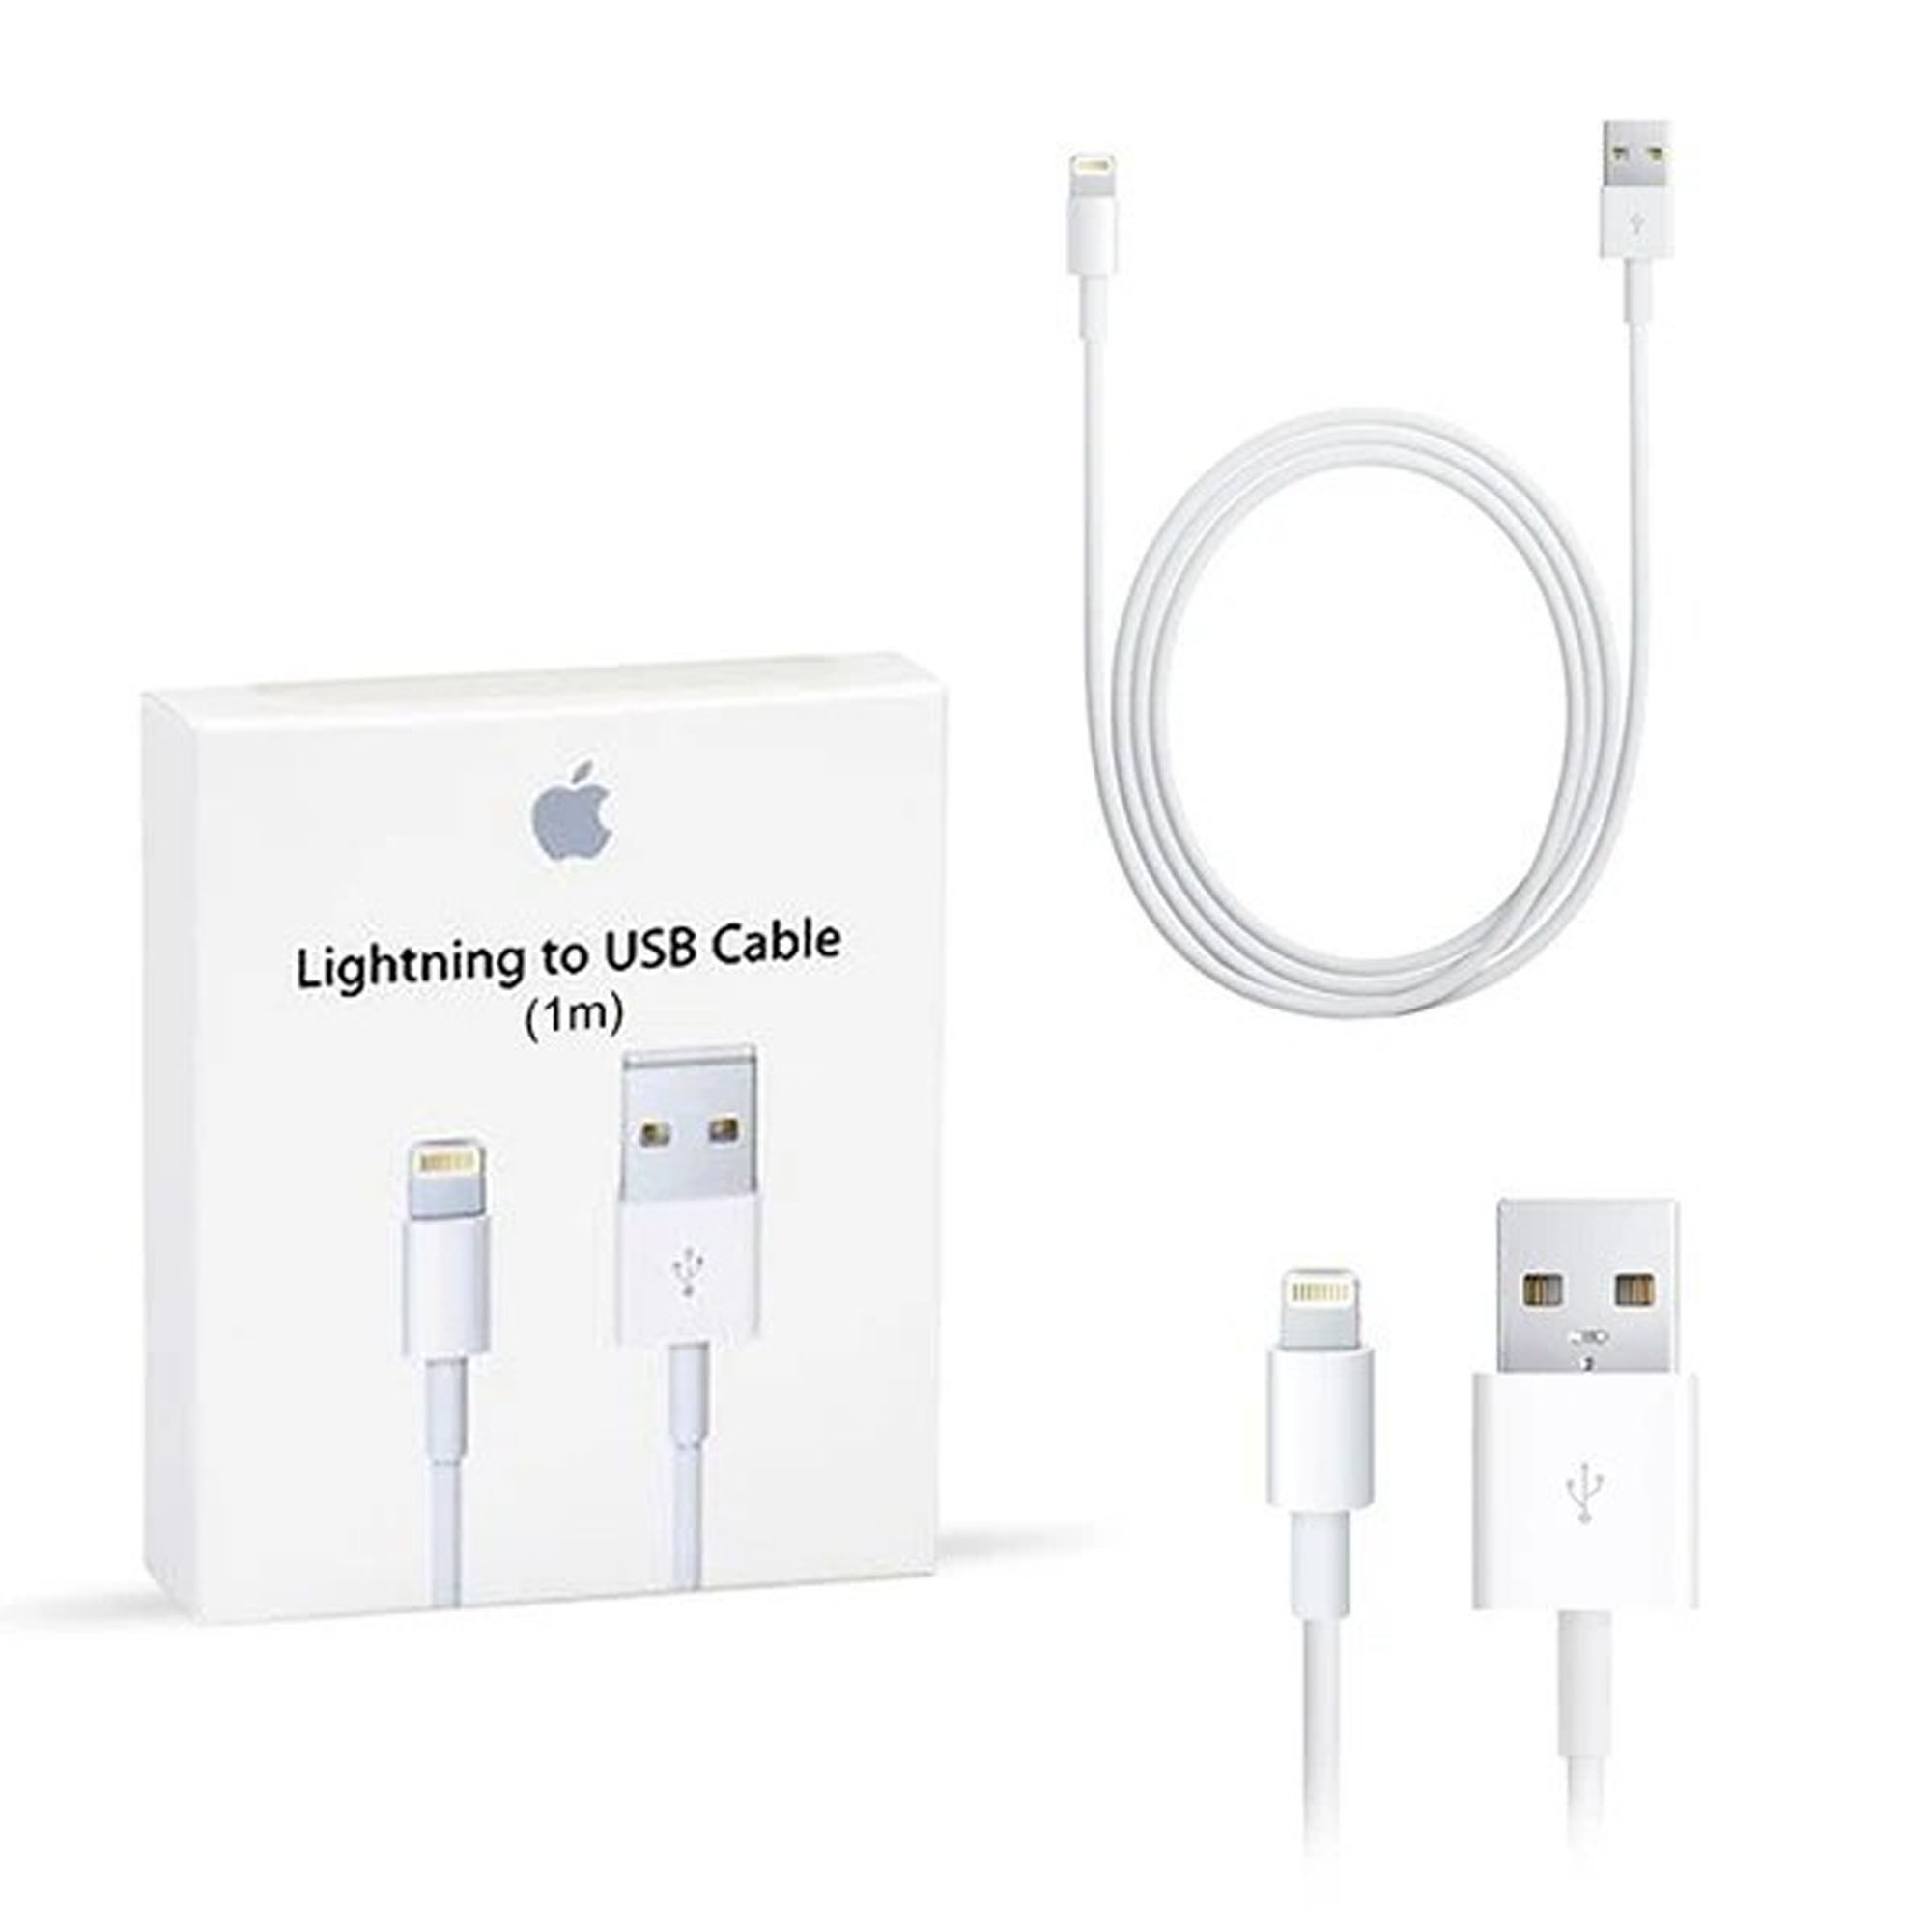 USB-C to Lightning Cable (1 m) - image 4 of 4